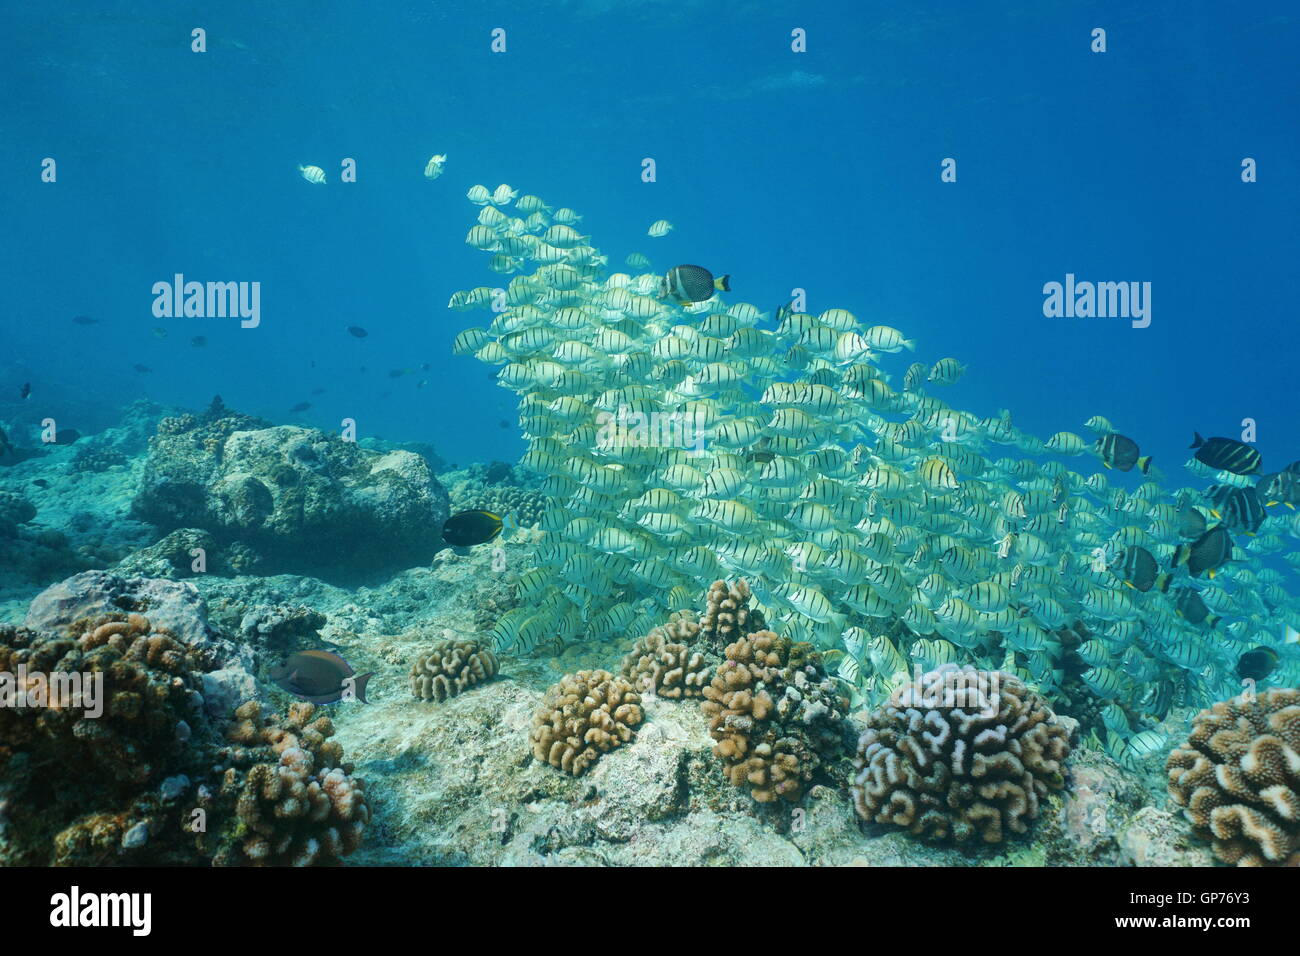 Tropical fish school convict tang underwater at the edge of a coral reef barrier, Rangiroa, Pacific ocean, French Polynesia Stock Photo